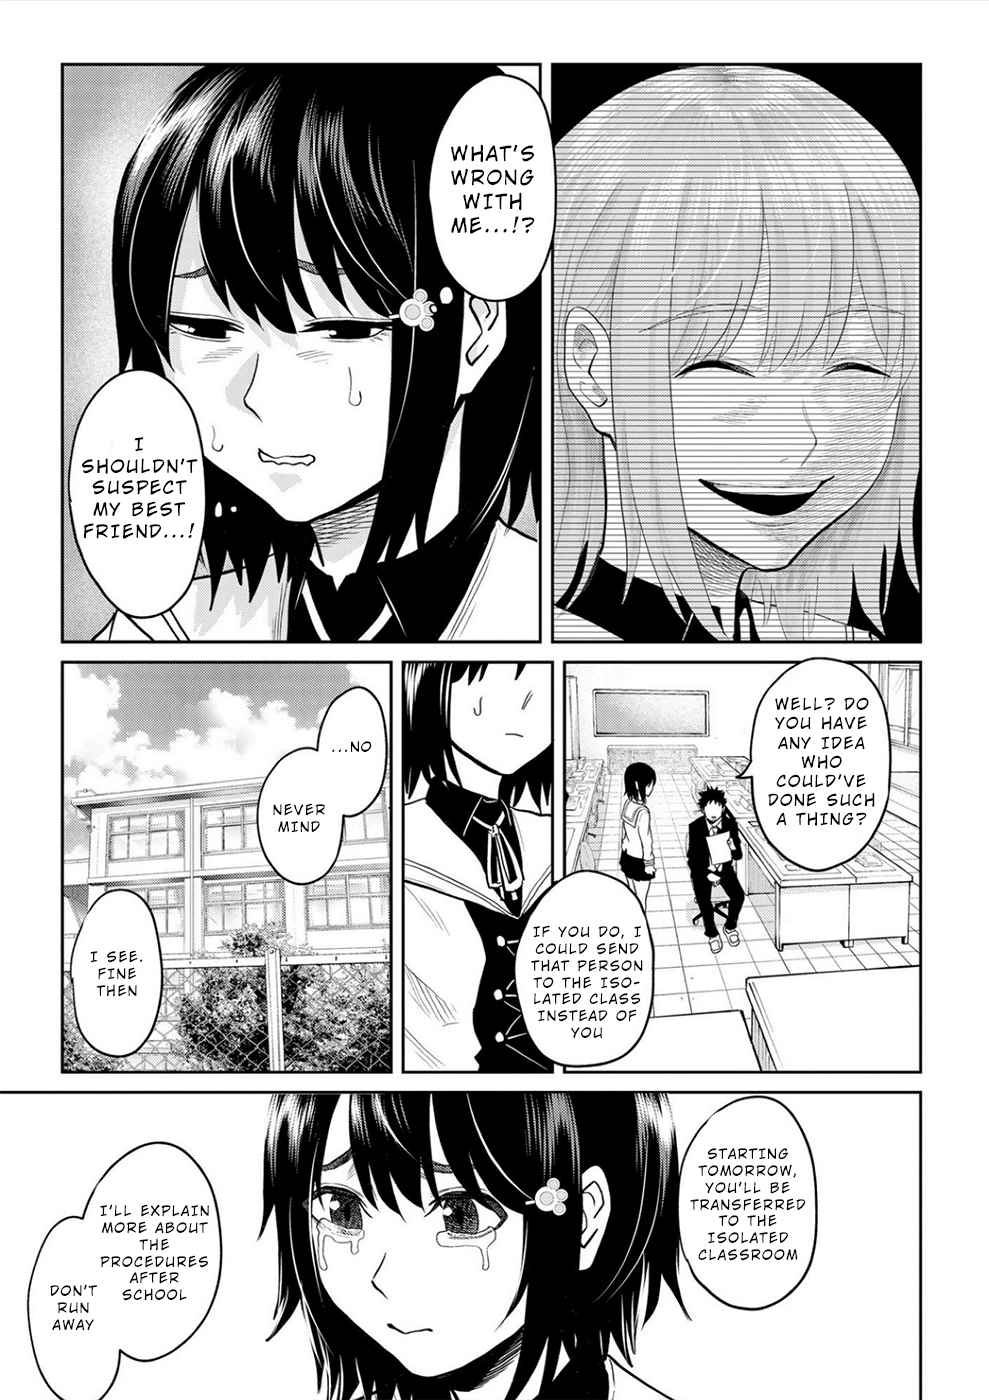 Rise of the Kowtowing Girl ~Sacrificial Revenge Game~ Vol.1 Ch.1